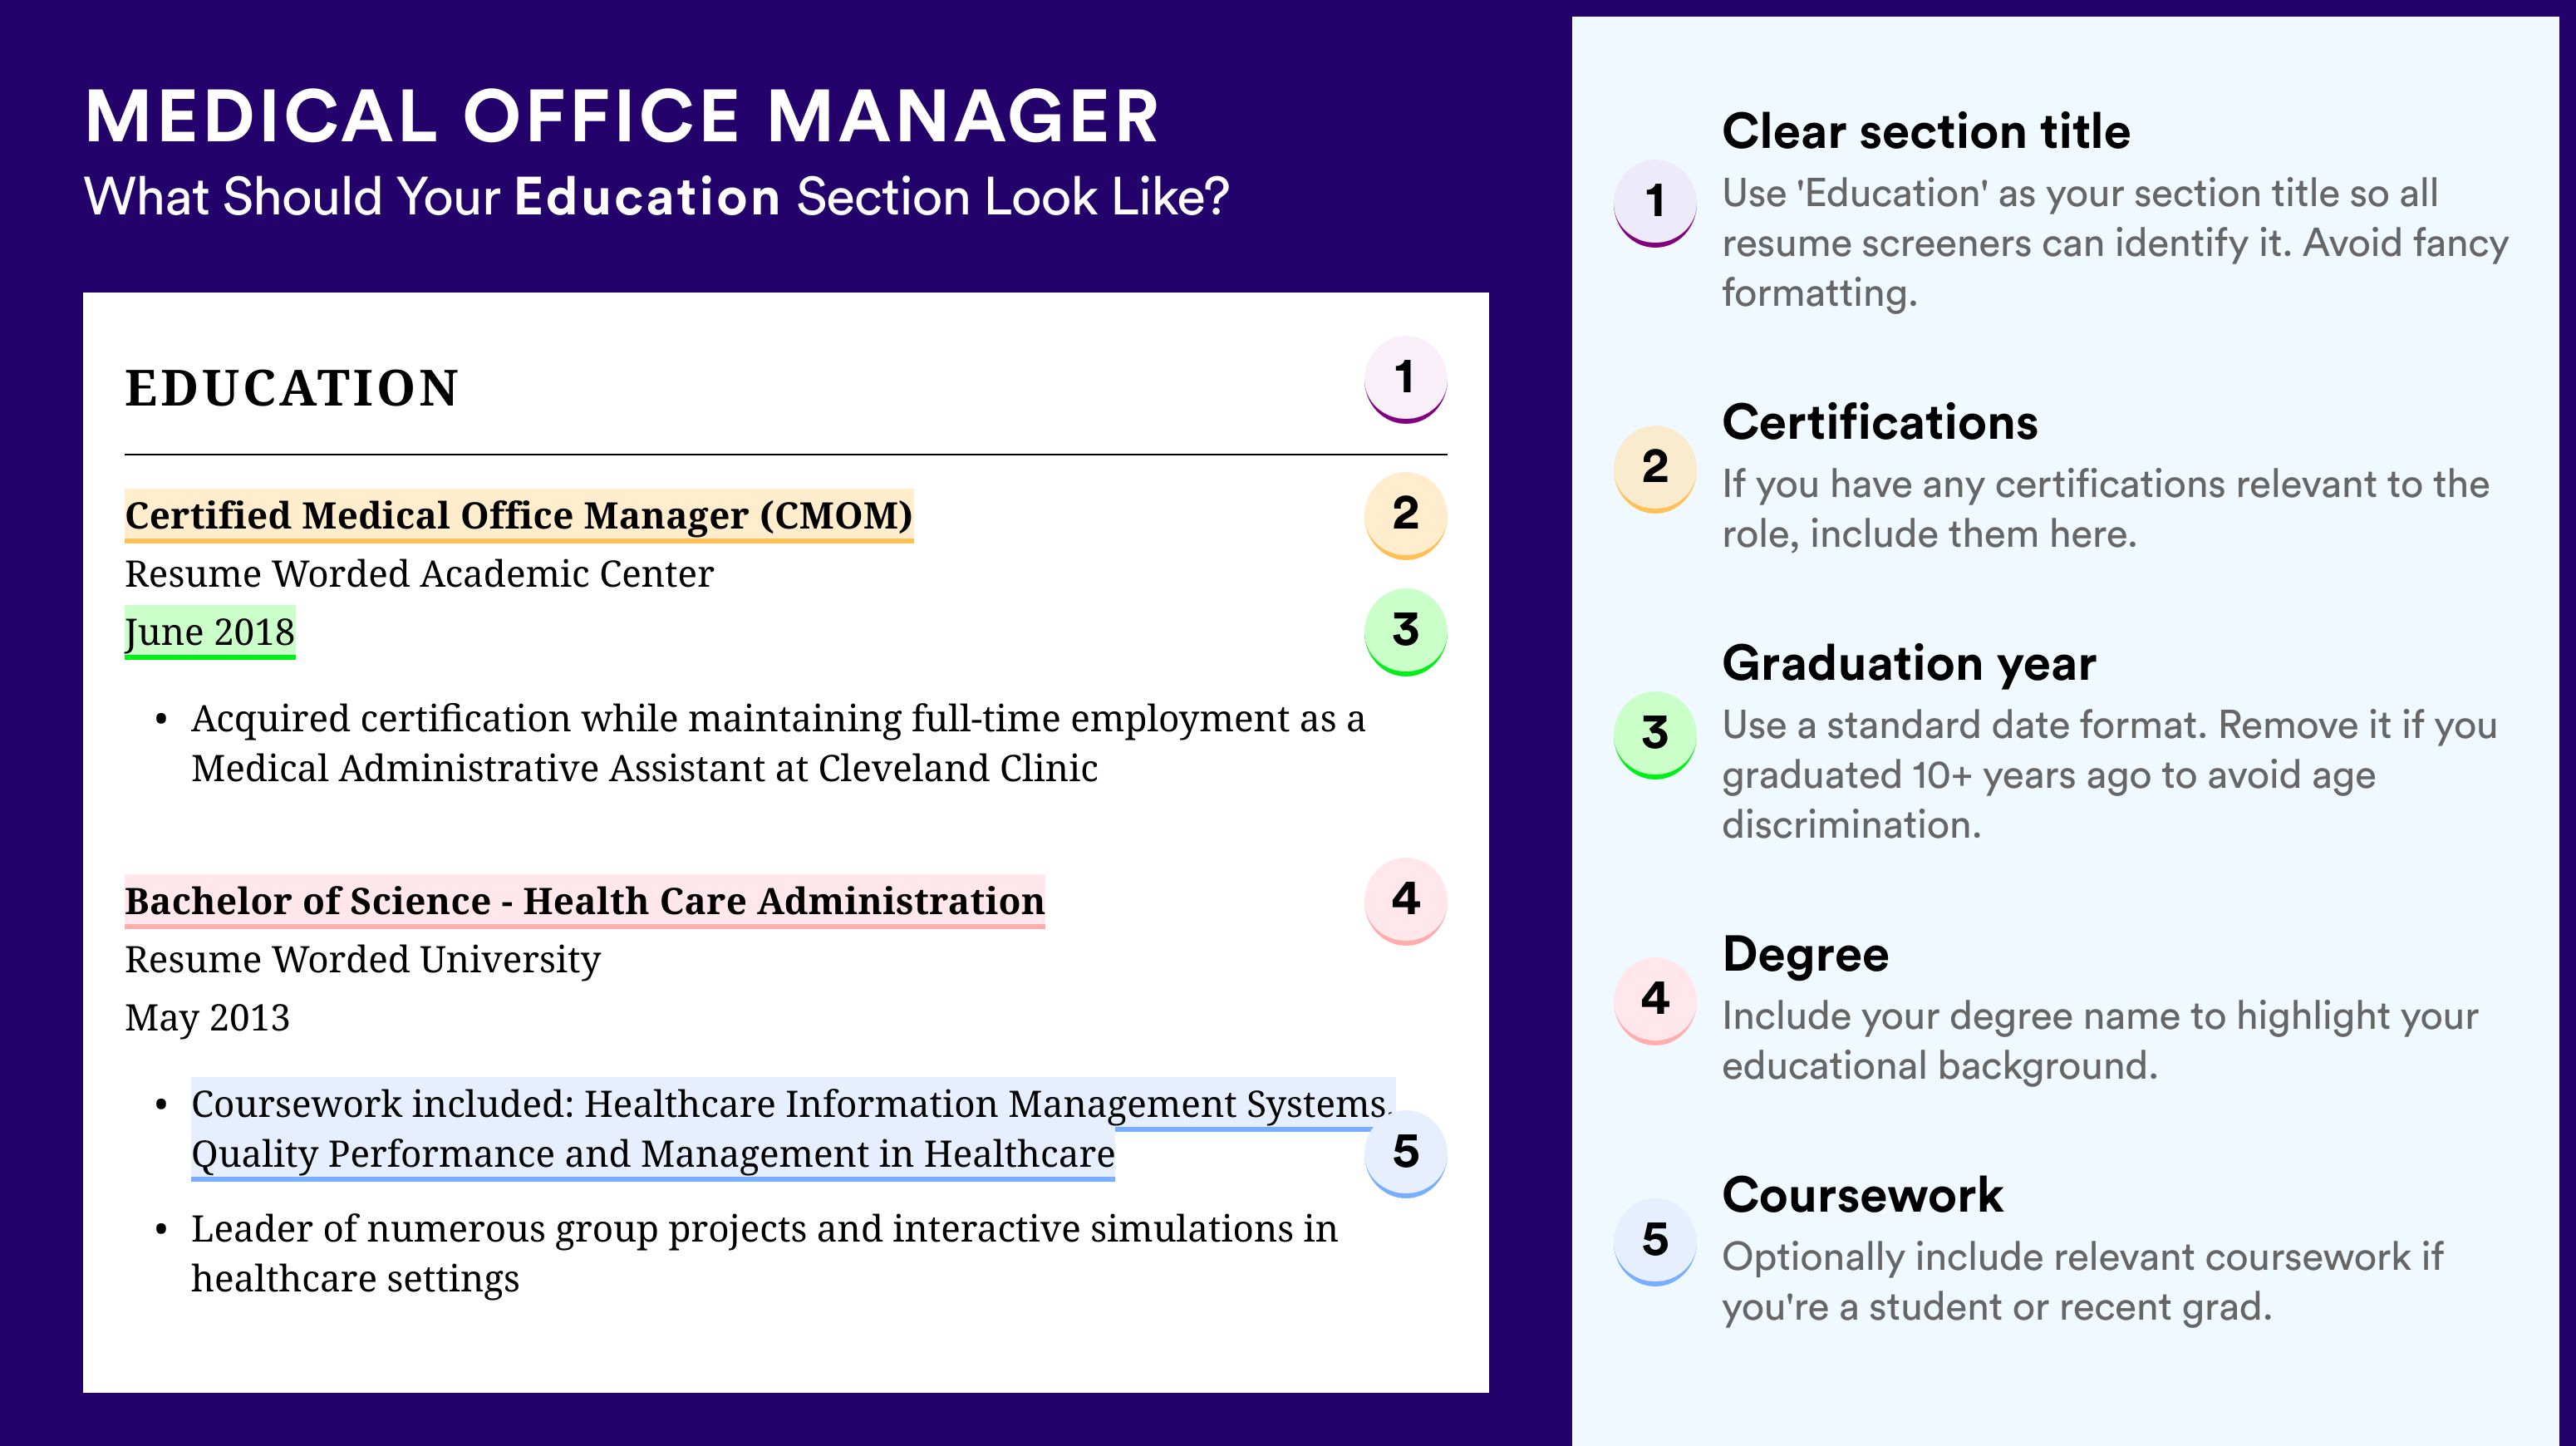 How To Write An Education Section - Medical Office Manager Roles